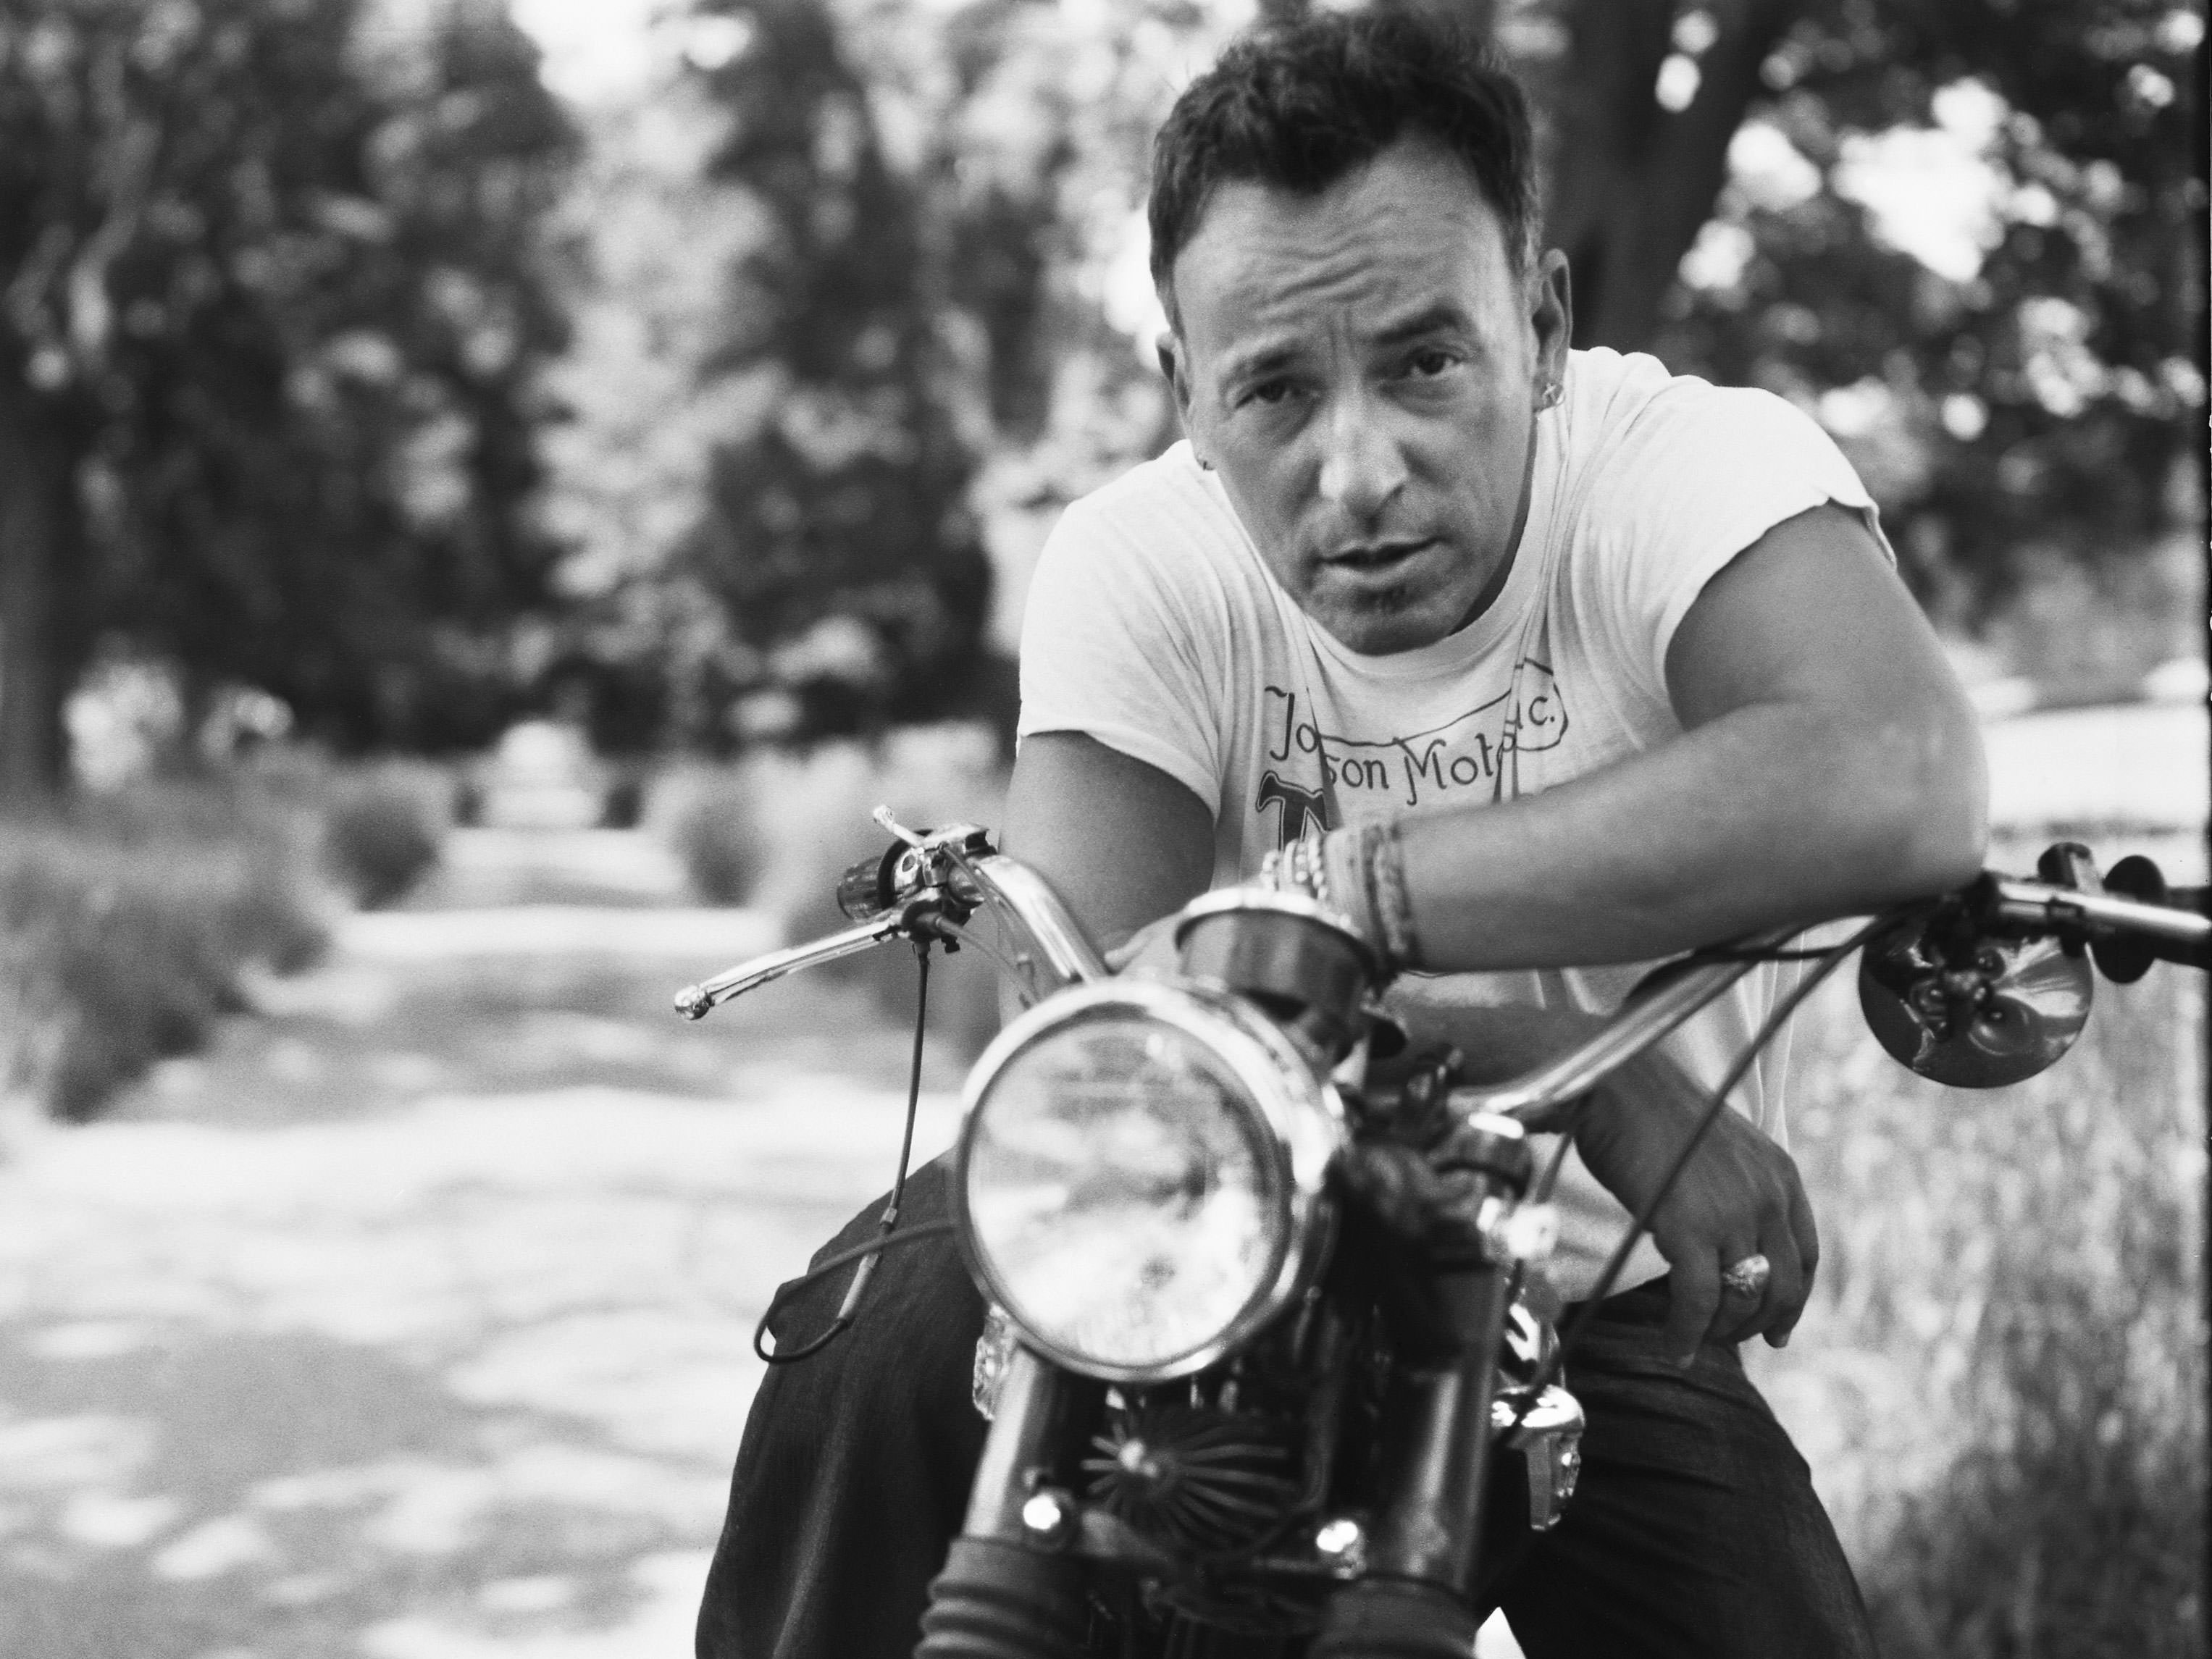 Bruce Springsteen Wallpapers Images Photos Pictures Backgrounds3054 x 2291